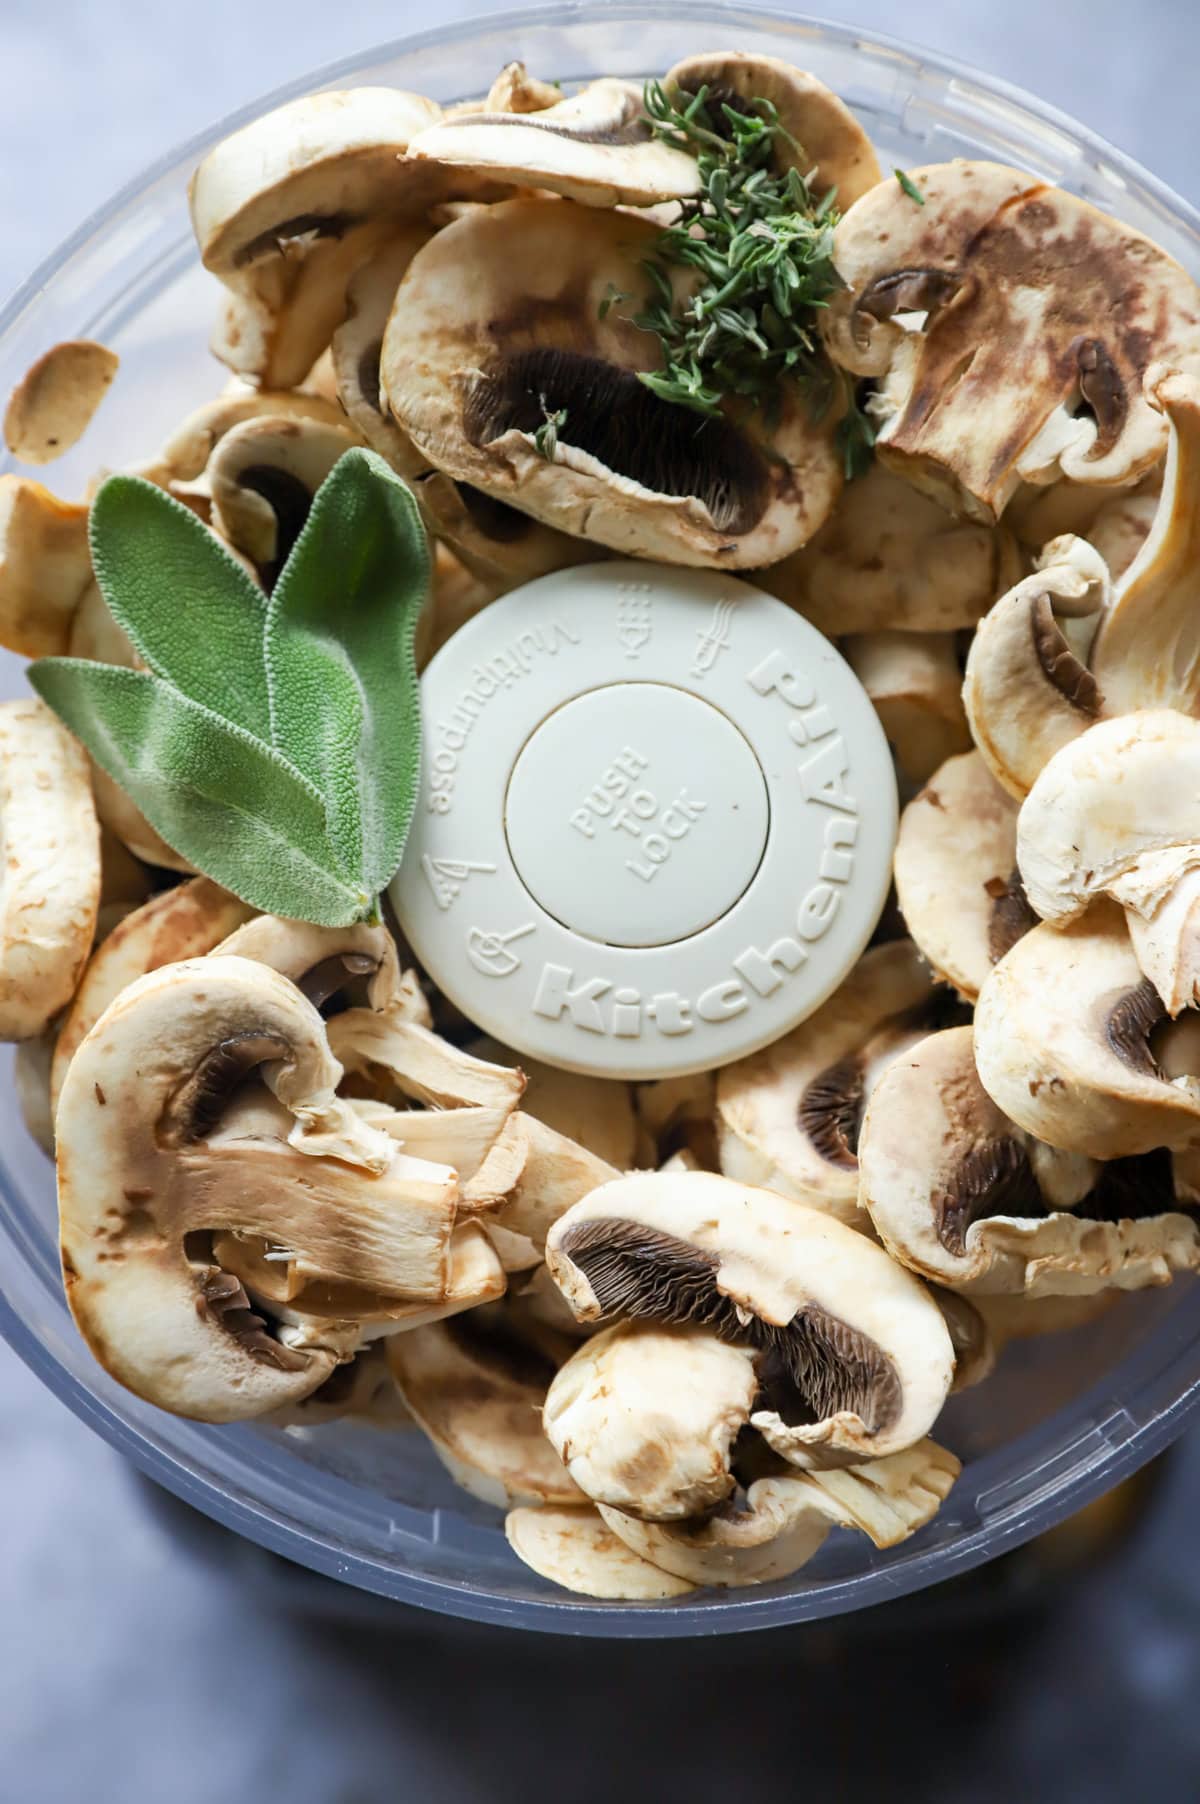 OVerhead image of mushrooms and herbs in food processor